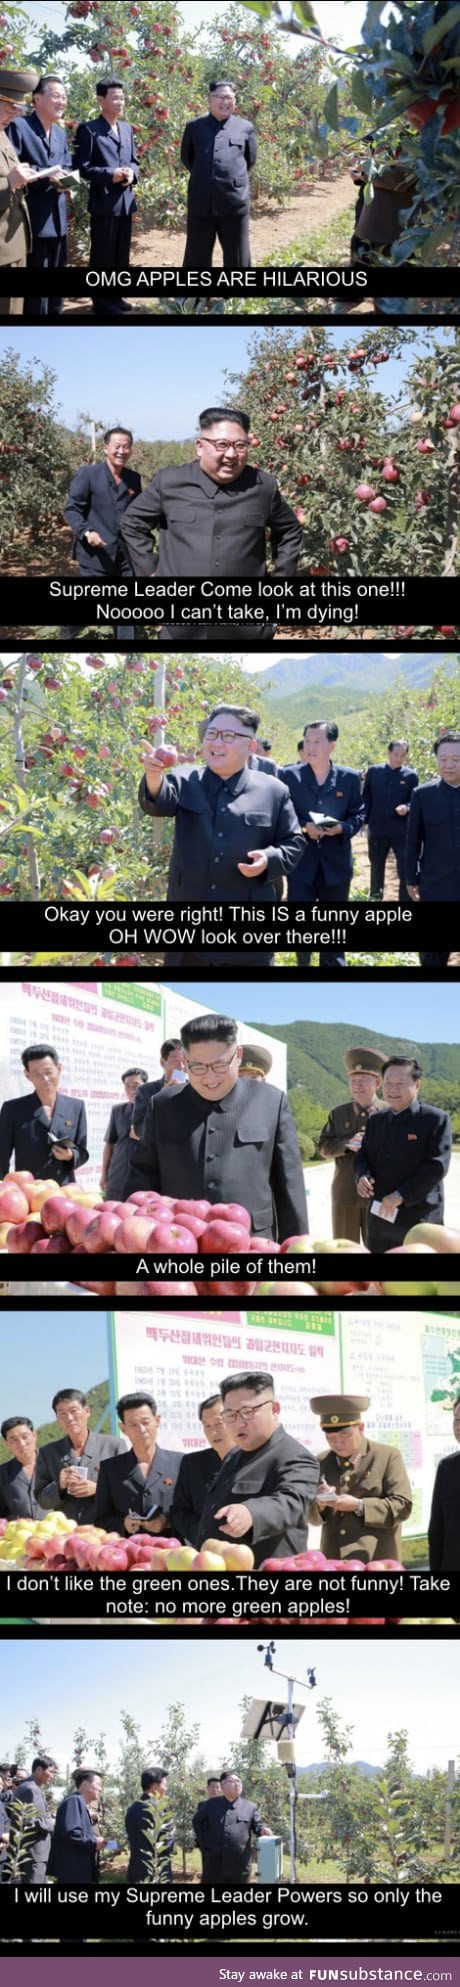 Red apples are hilarious